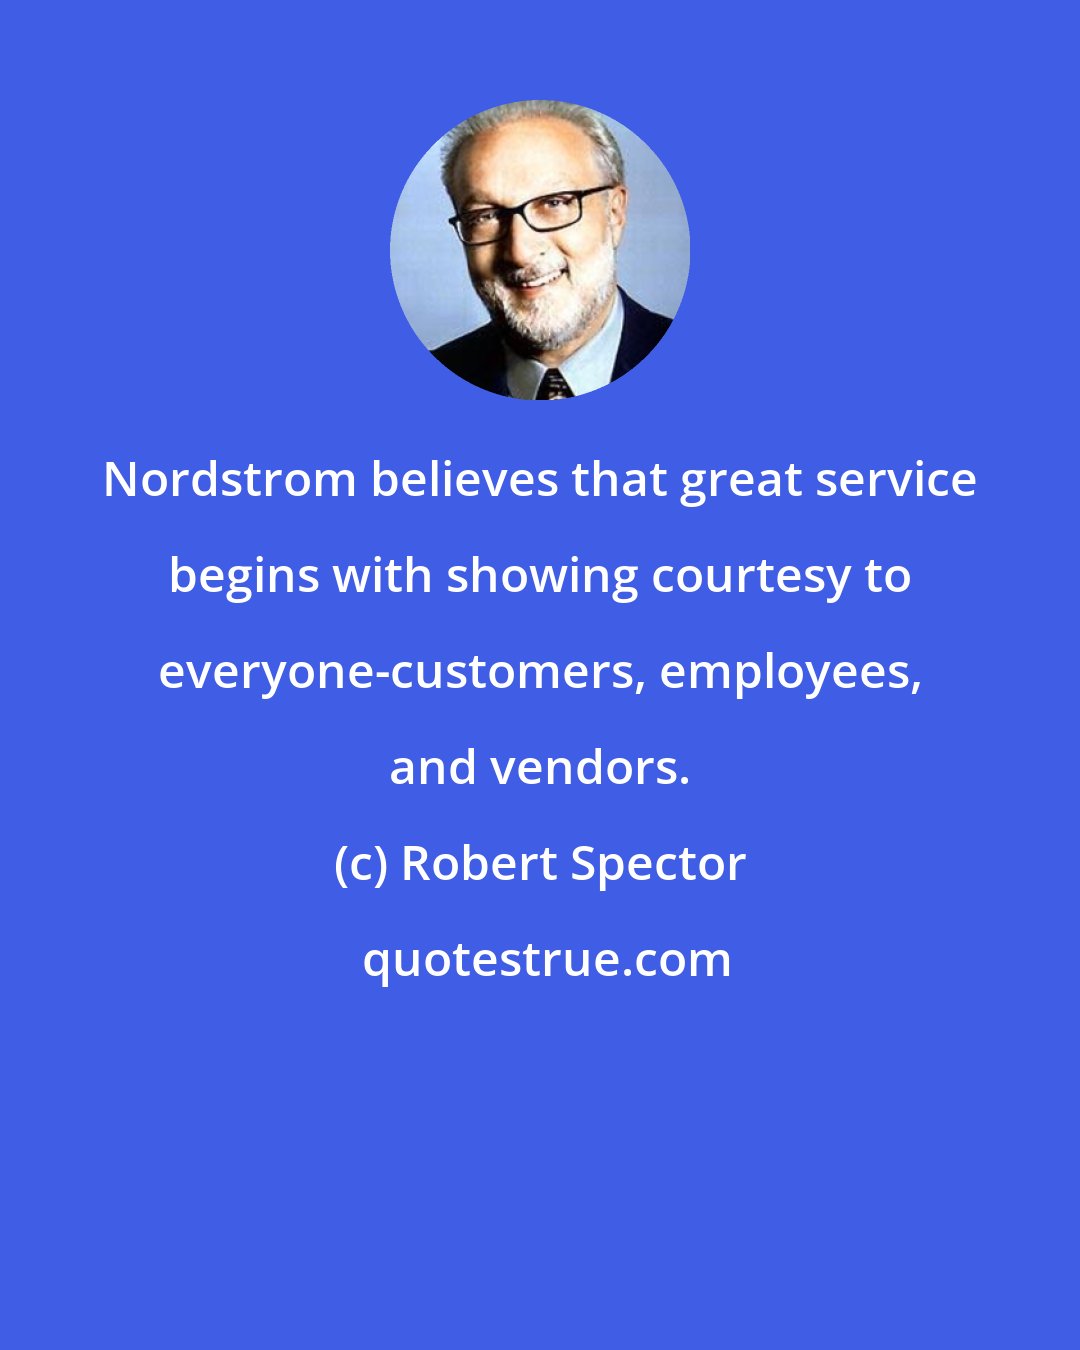 Robert Spector: Nordstrom believes that great service begins with showing courtesy to everyone-customers, employees, and vendors.